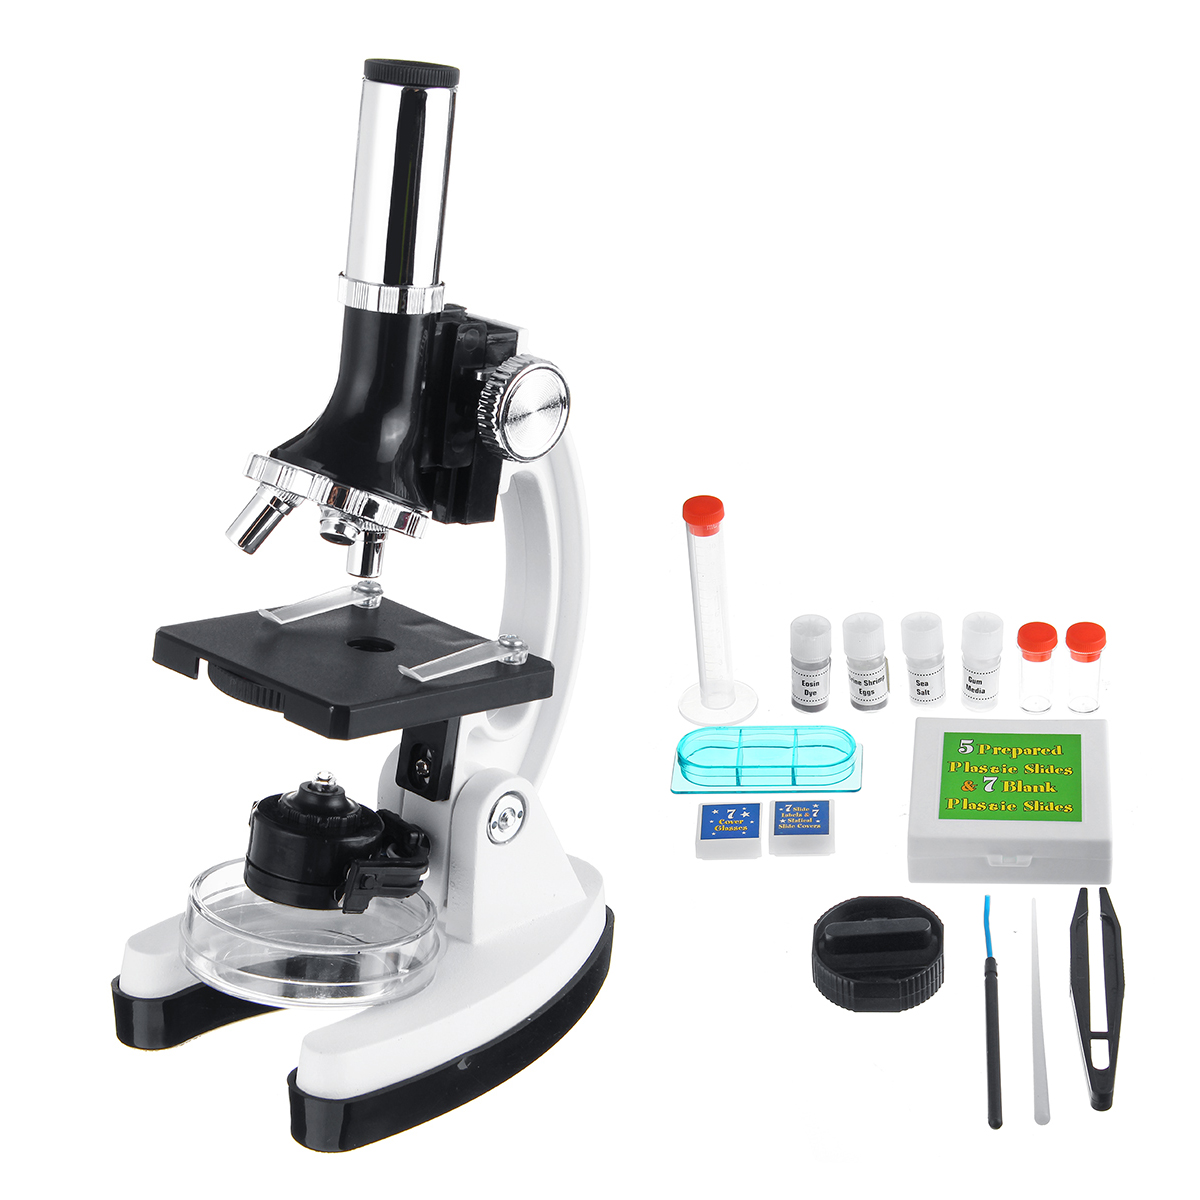 

LED Science Microscope Kit for Children 1200x 1200 Scientific Instruments Toy Set for Early Education accessory kit